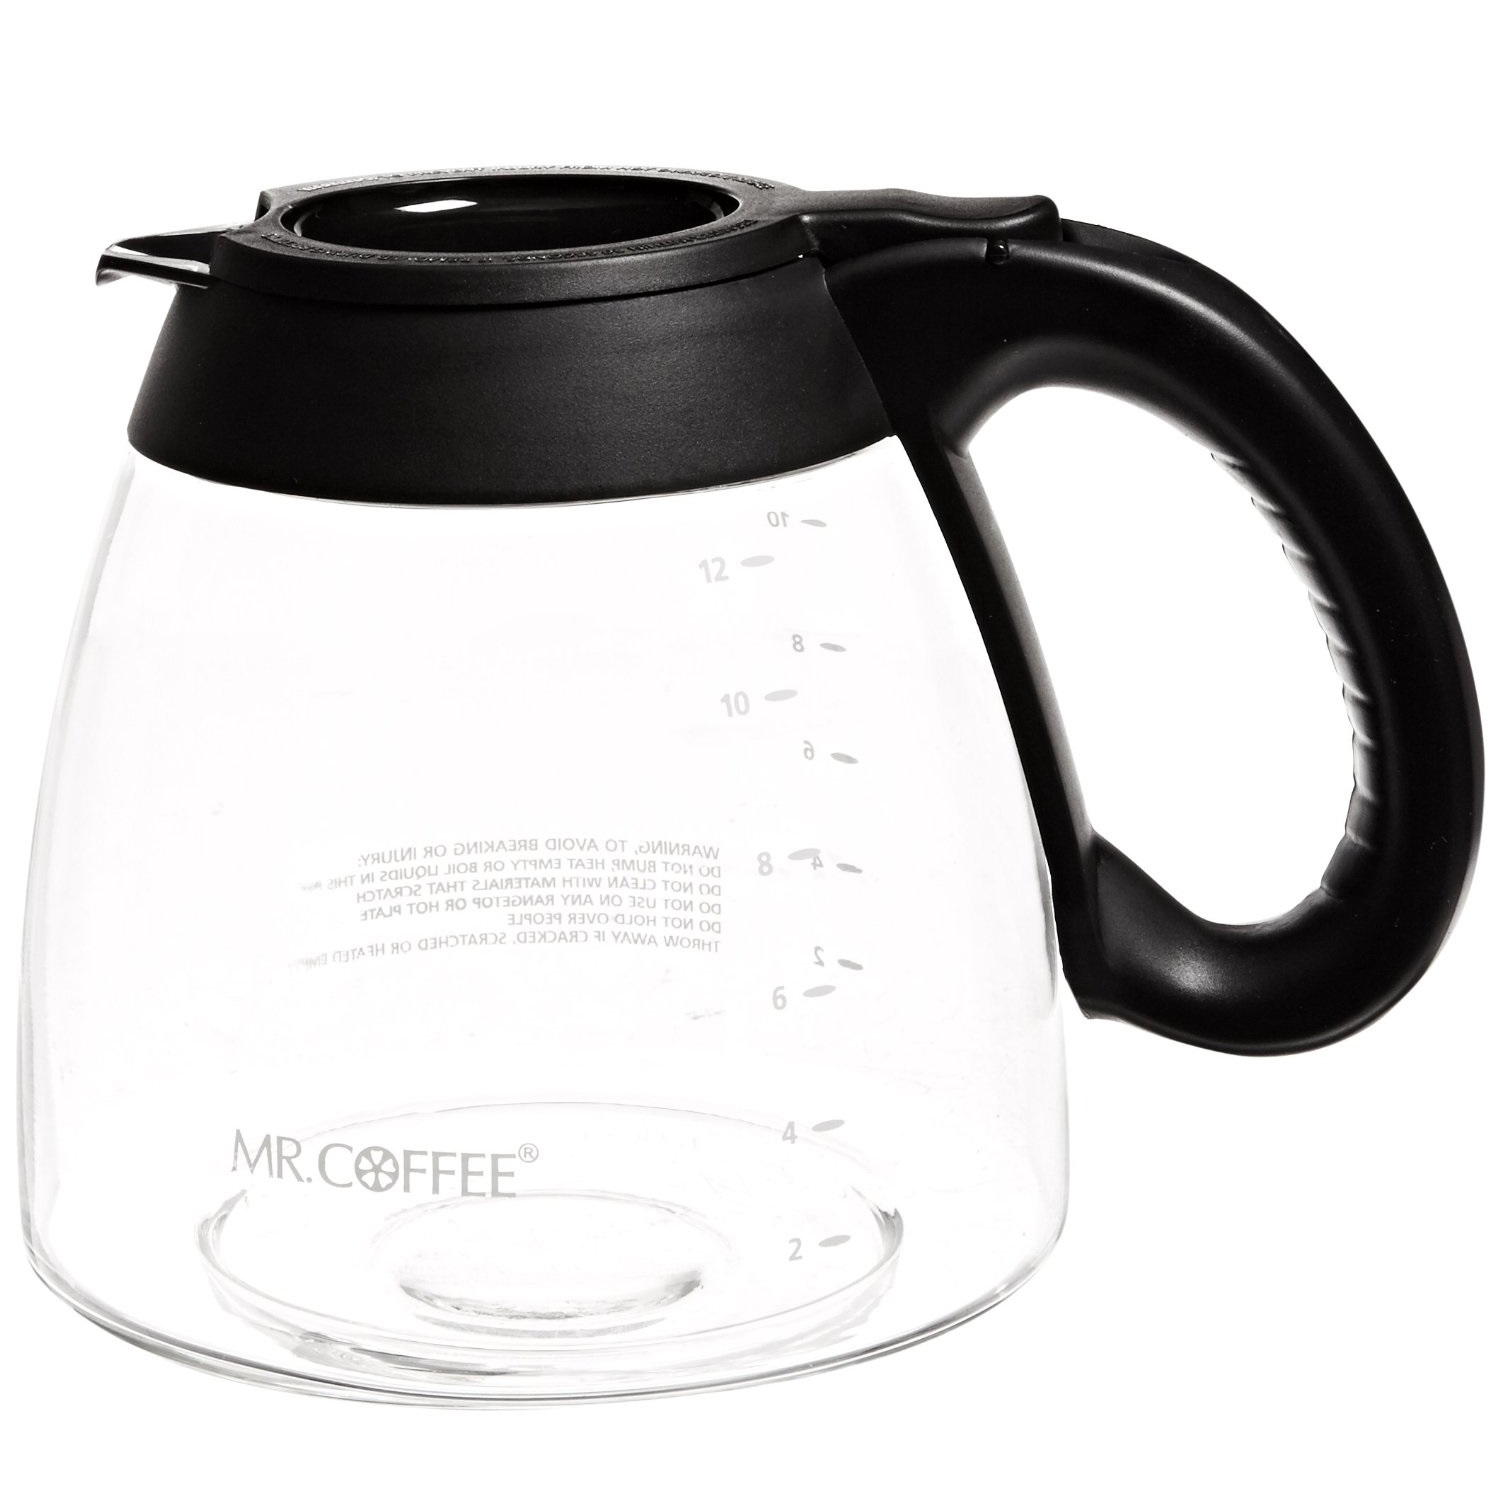 Mr. Coffee 4010392 12-Cup Replacement Decanter for IS and FT Series